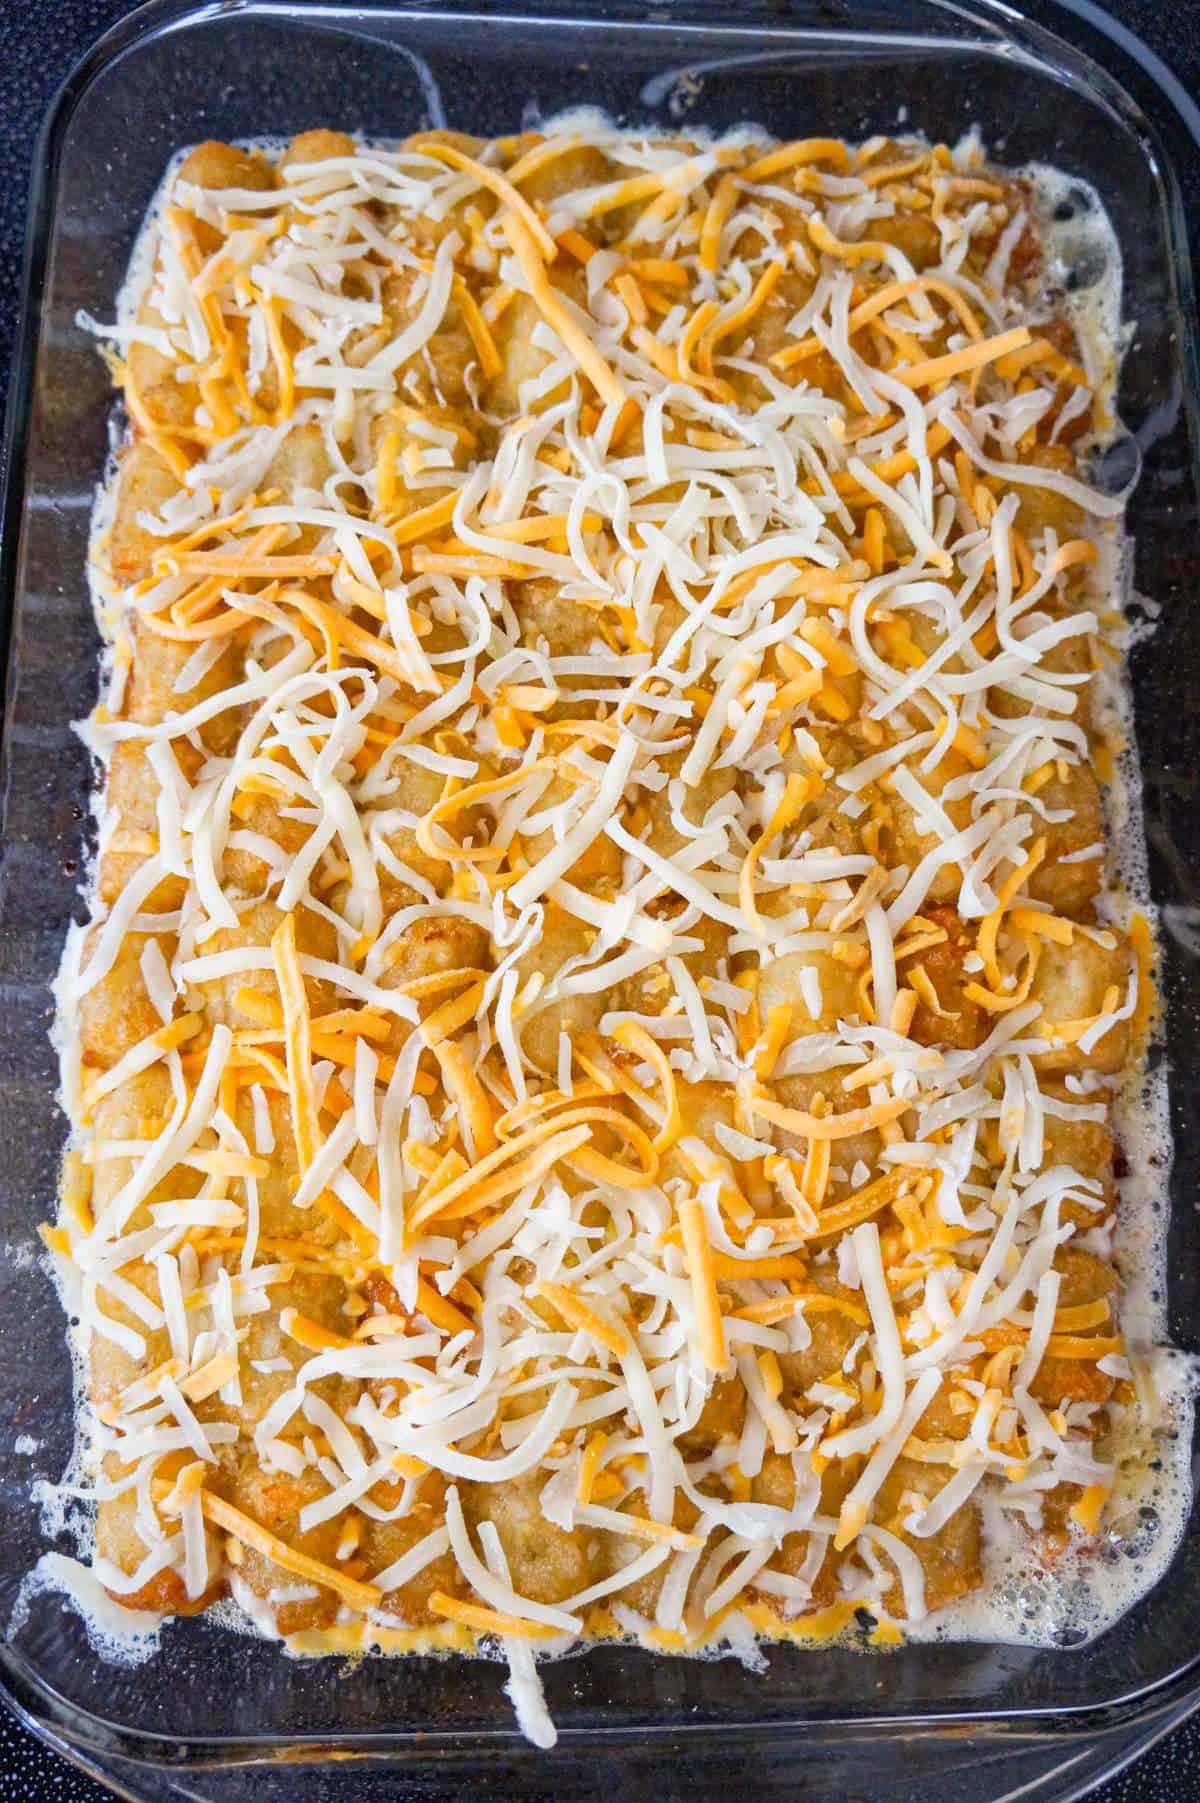 shredded cheese on top of tater tot casserole